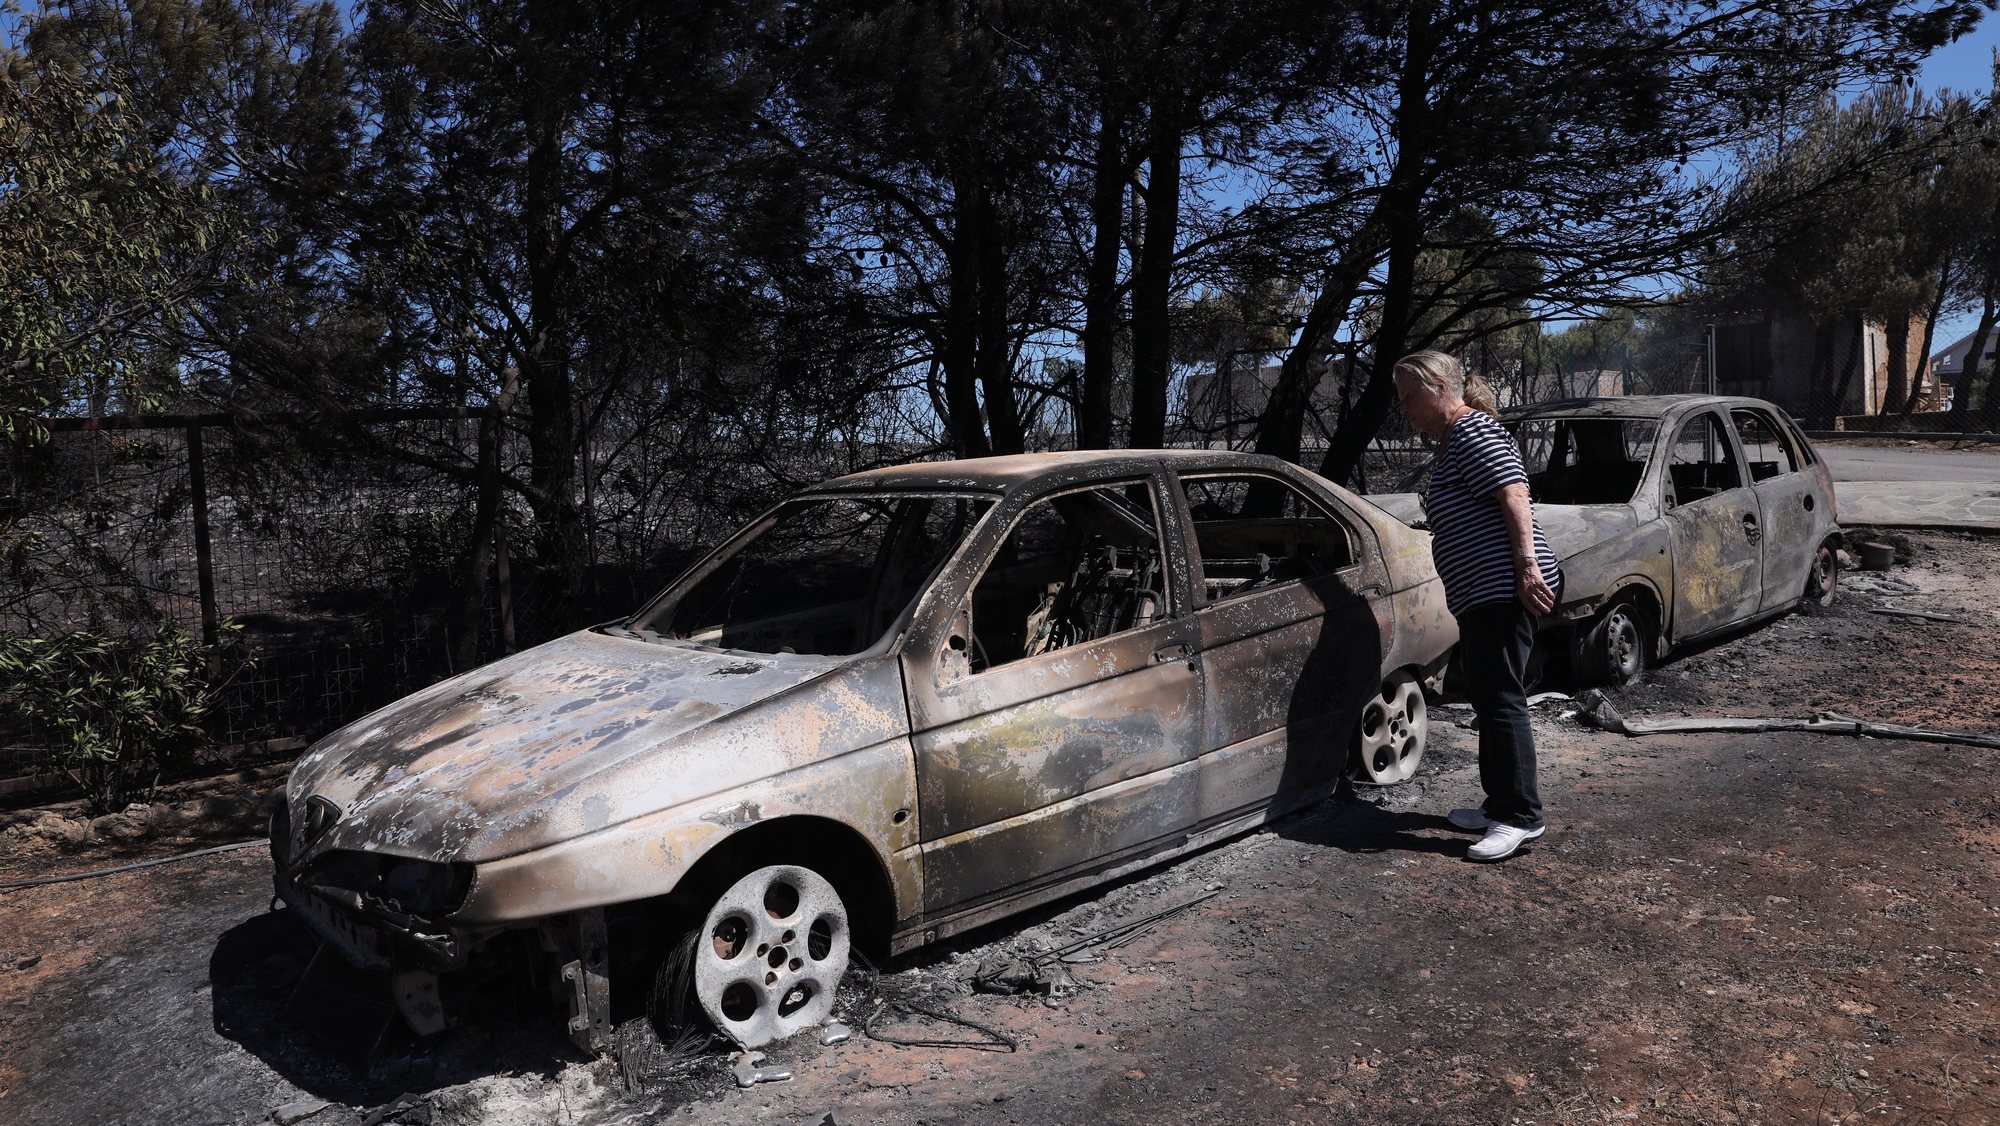 epa10082423 A woman looks at burnt cars after wildfire at the north-east suburb of Anthousa, near Athens, Greece, 20 July 2022. The Penteli fire appears to be subsiding, with no active fronts and all forces now working to extinguish minor small blazes and to prevent any danger of a rekindling of the flames, according to the latest update on 20 July afternoon from the civil protection service&#039;s coordination centre.  EPA/GEORGE VITSARAS